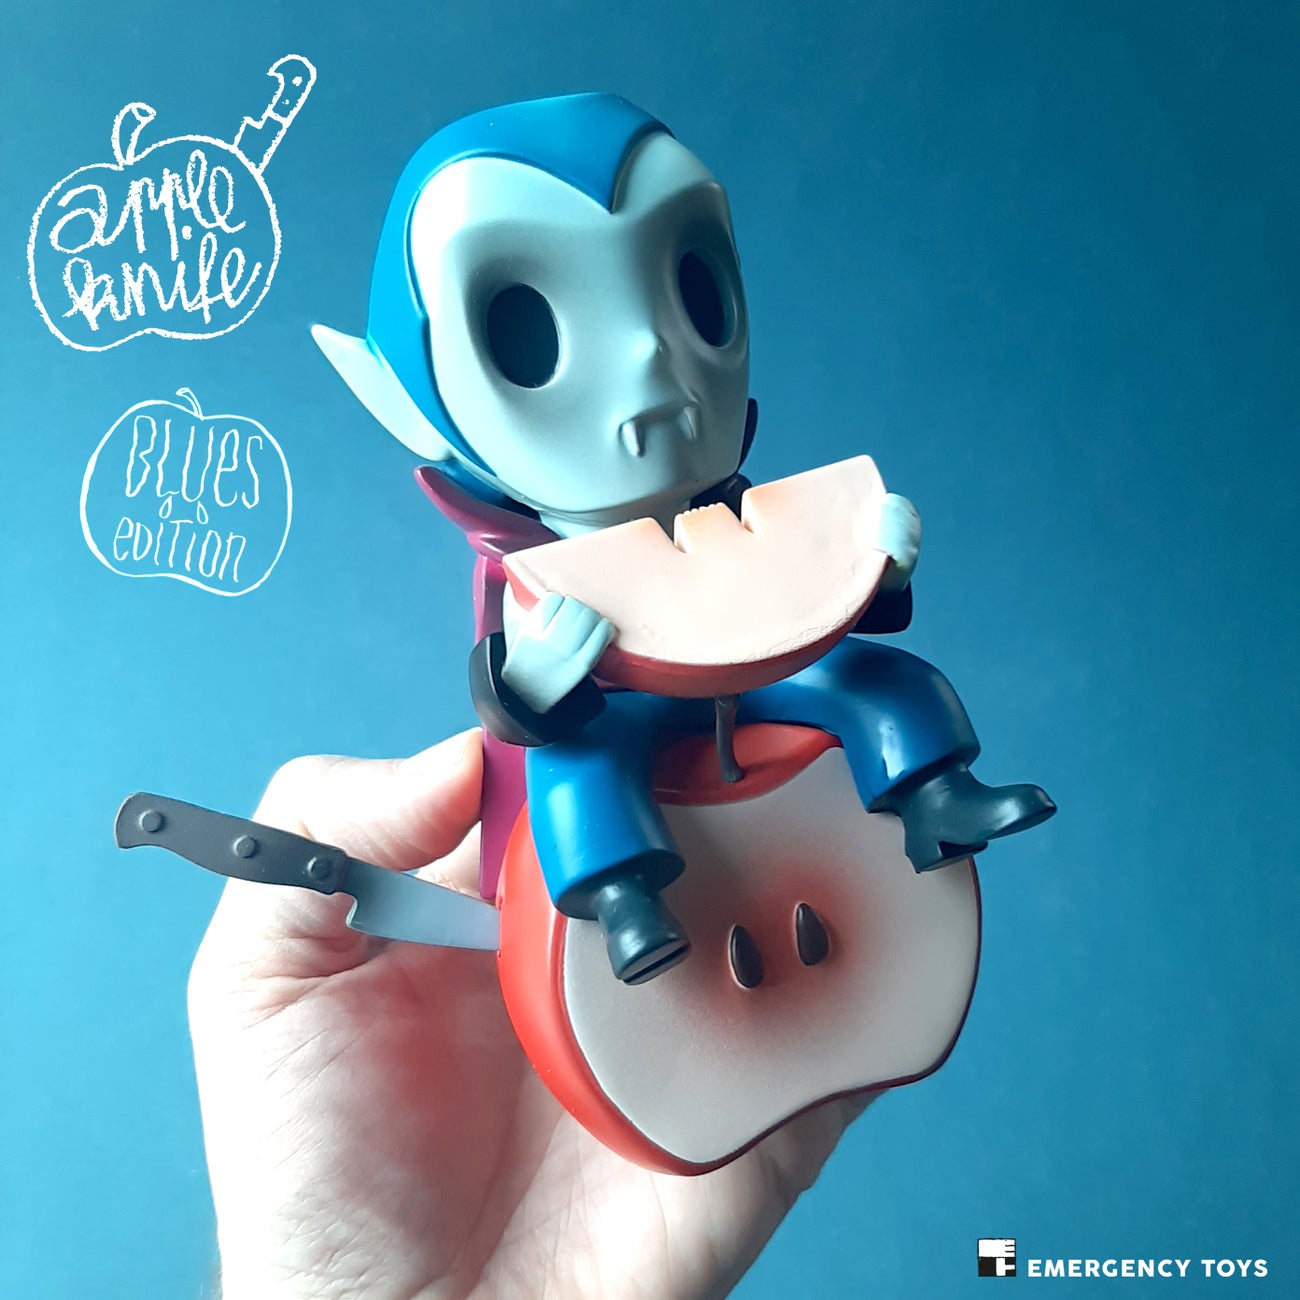 APPLE KNIFE BLUES EDITION by Emergency Toys